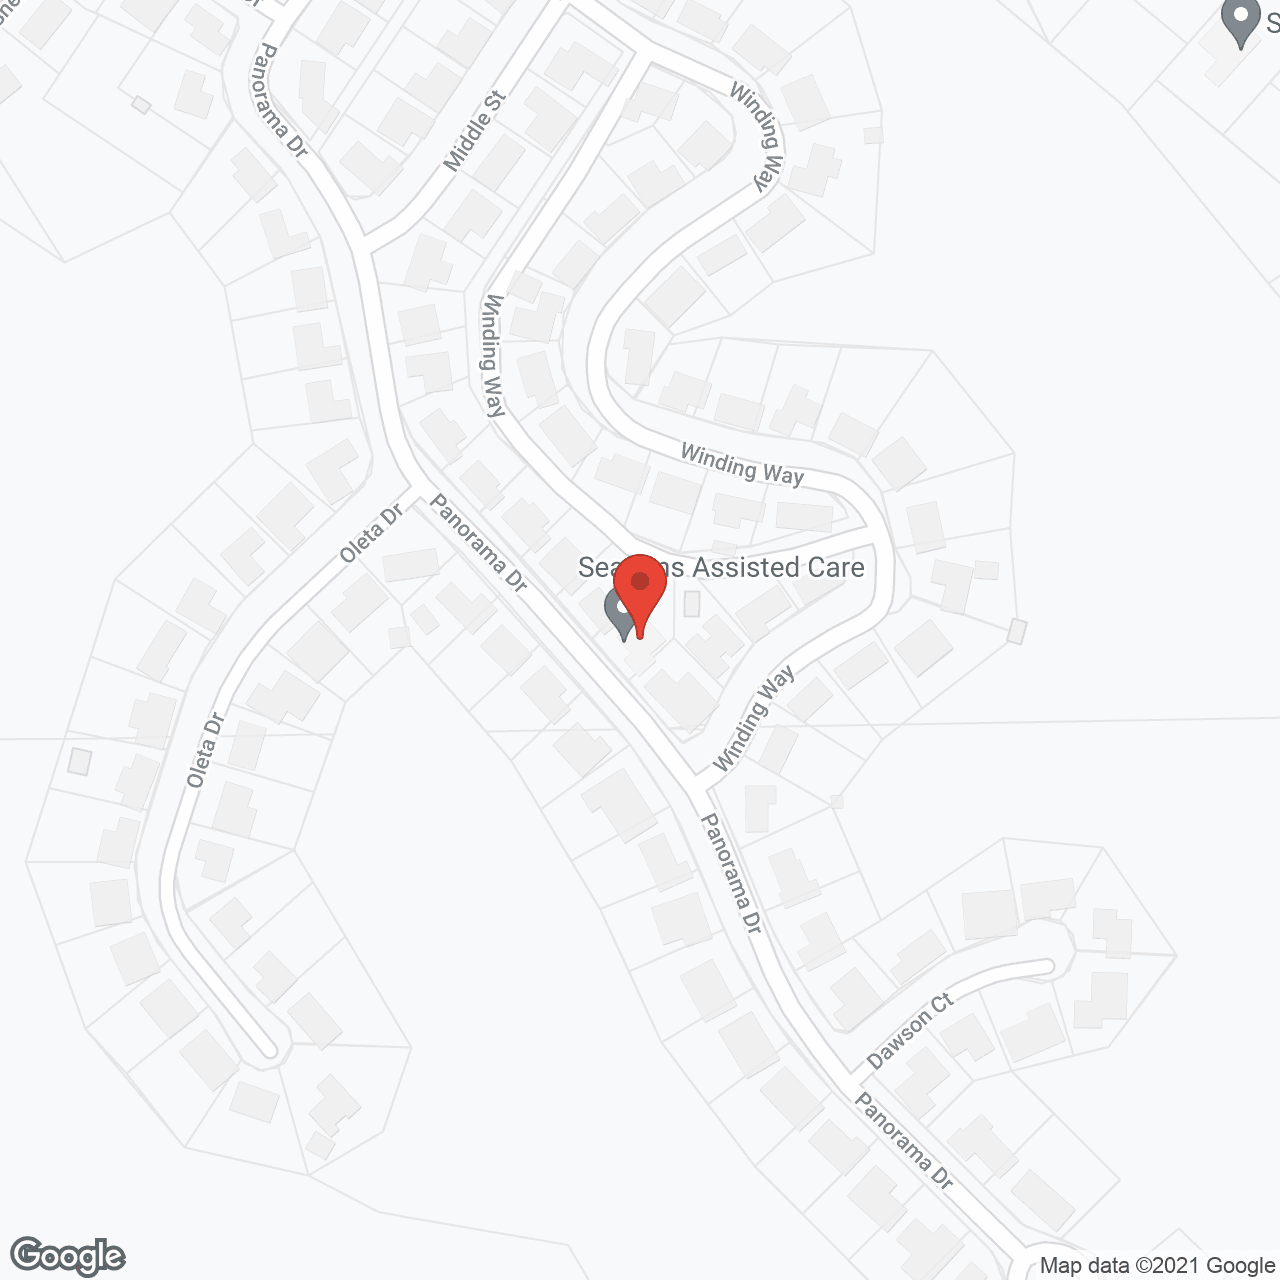 Season's Assisted Care Home in google map